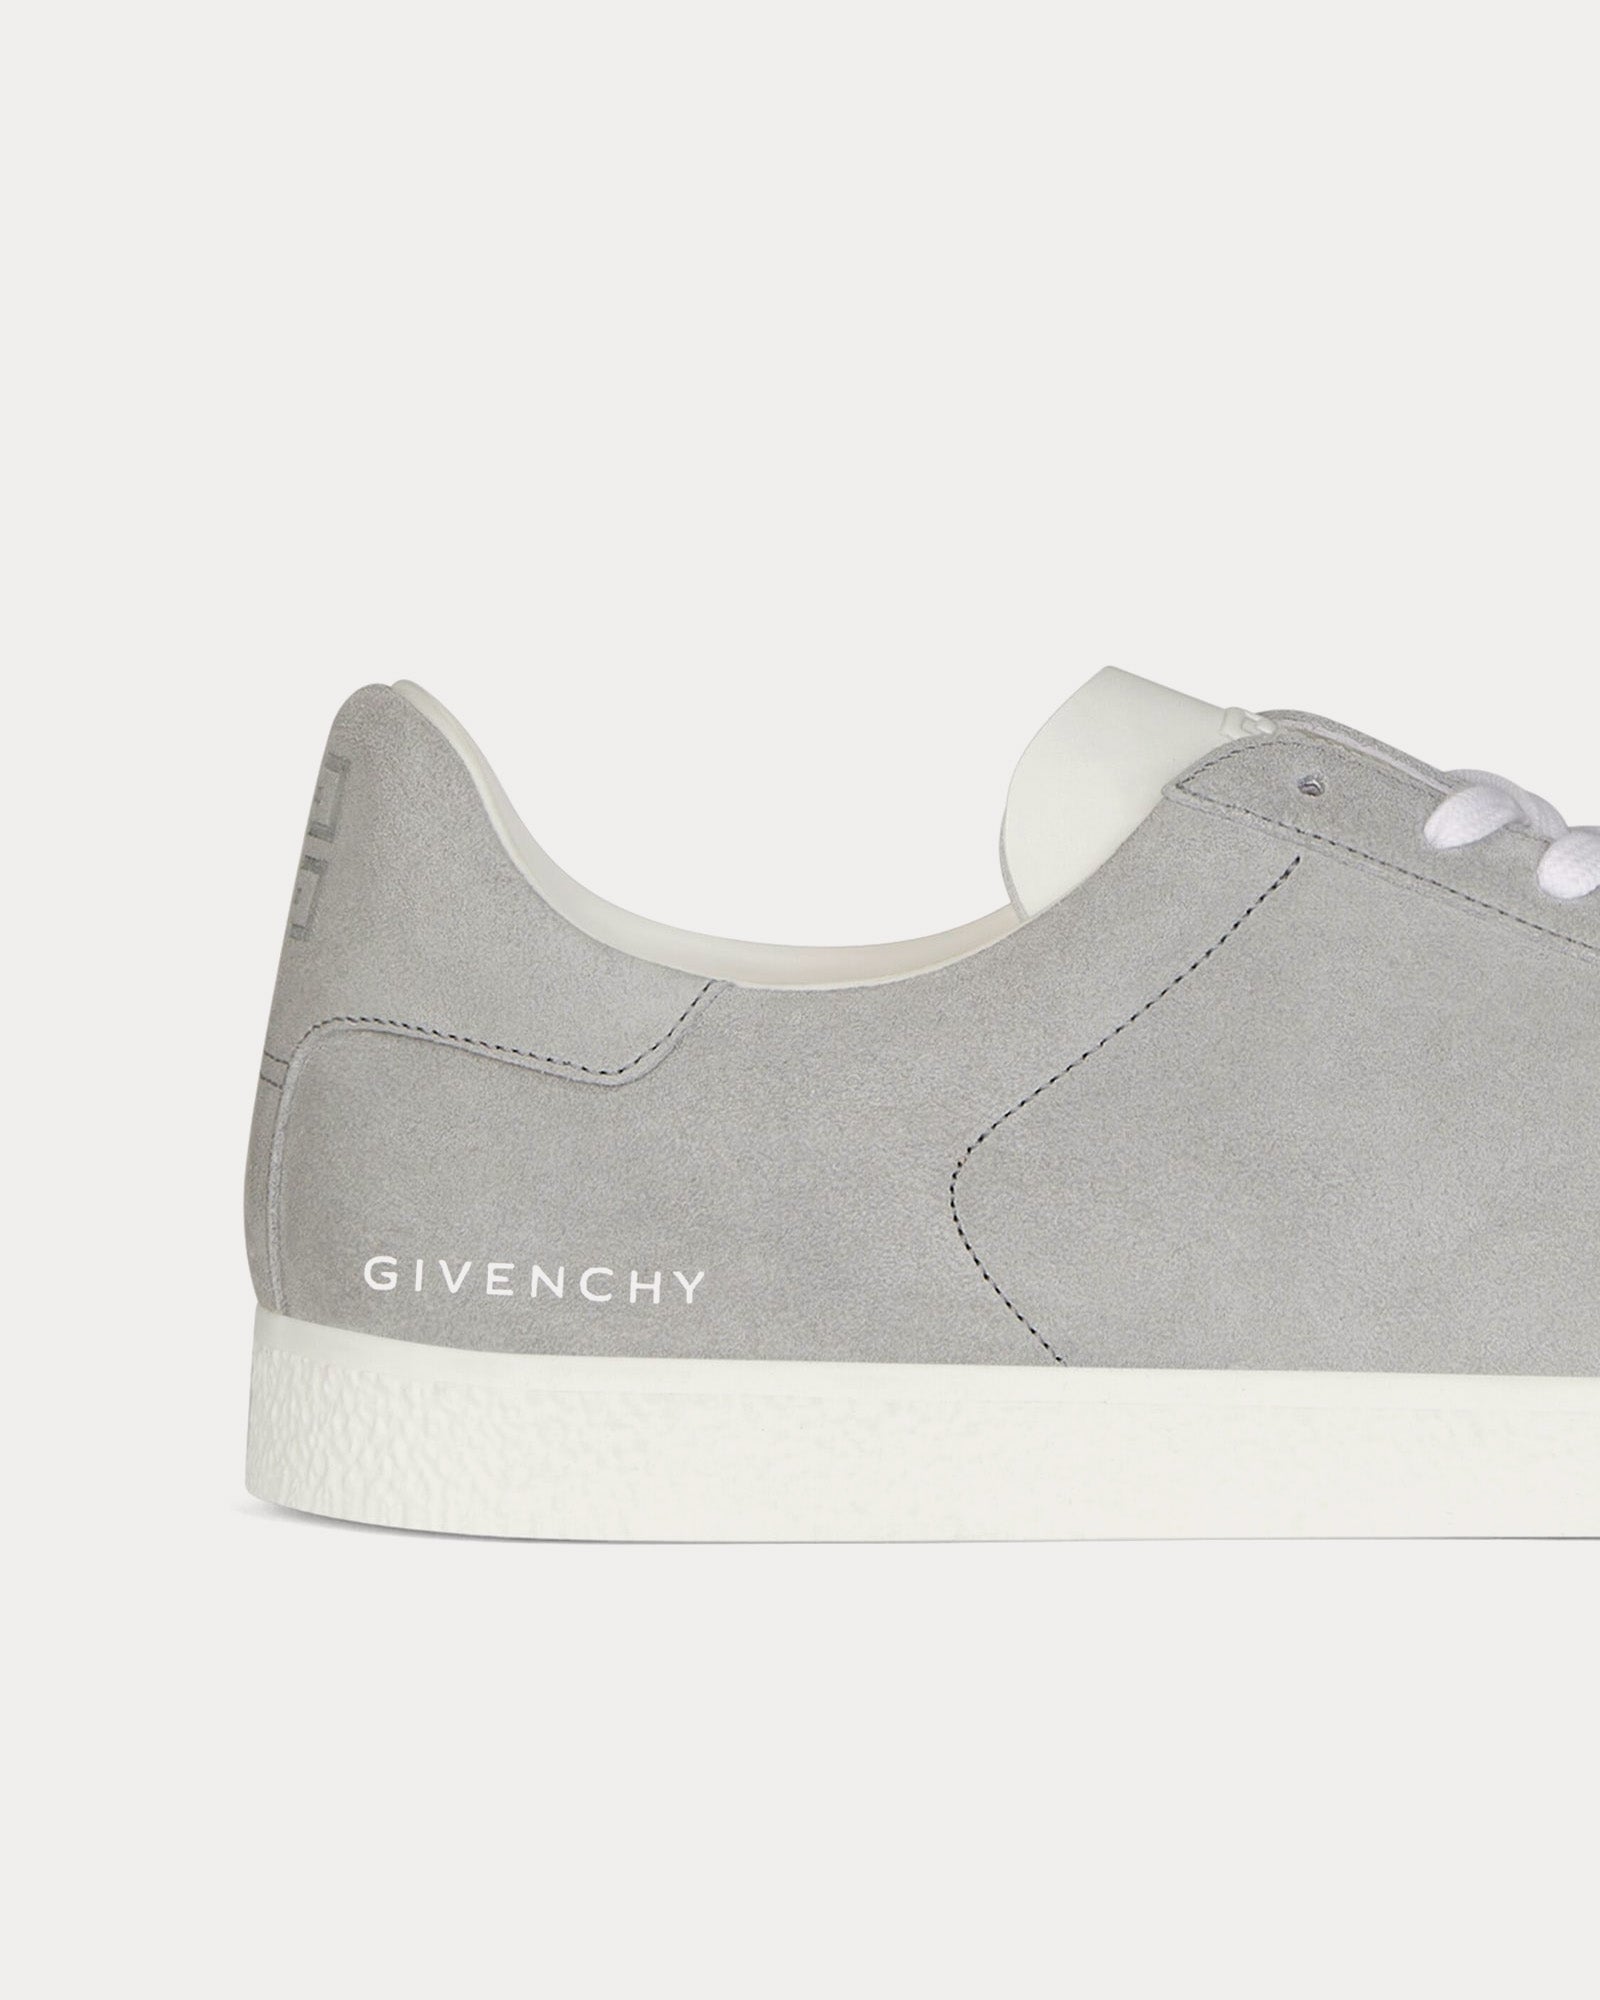 Givenchy - Town Suede Light Grey Low Top Sneakers